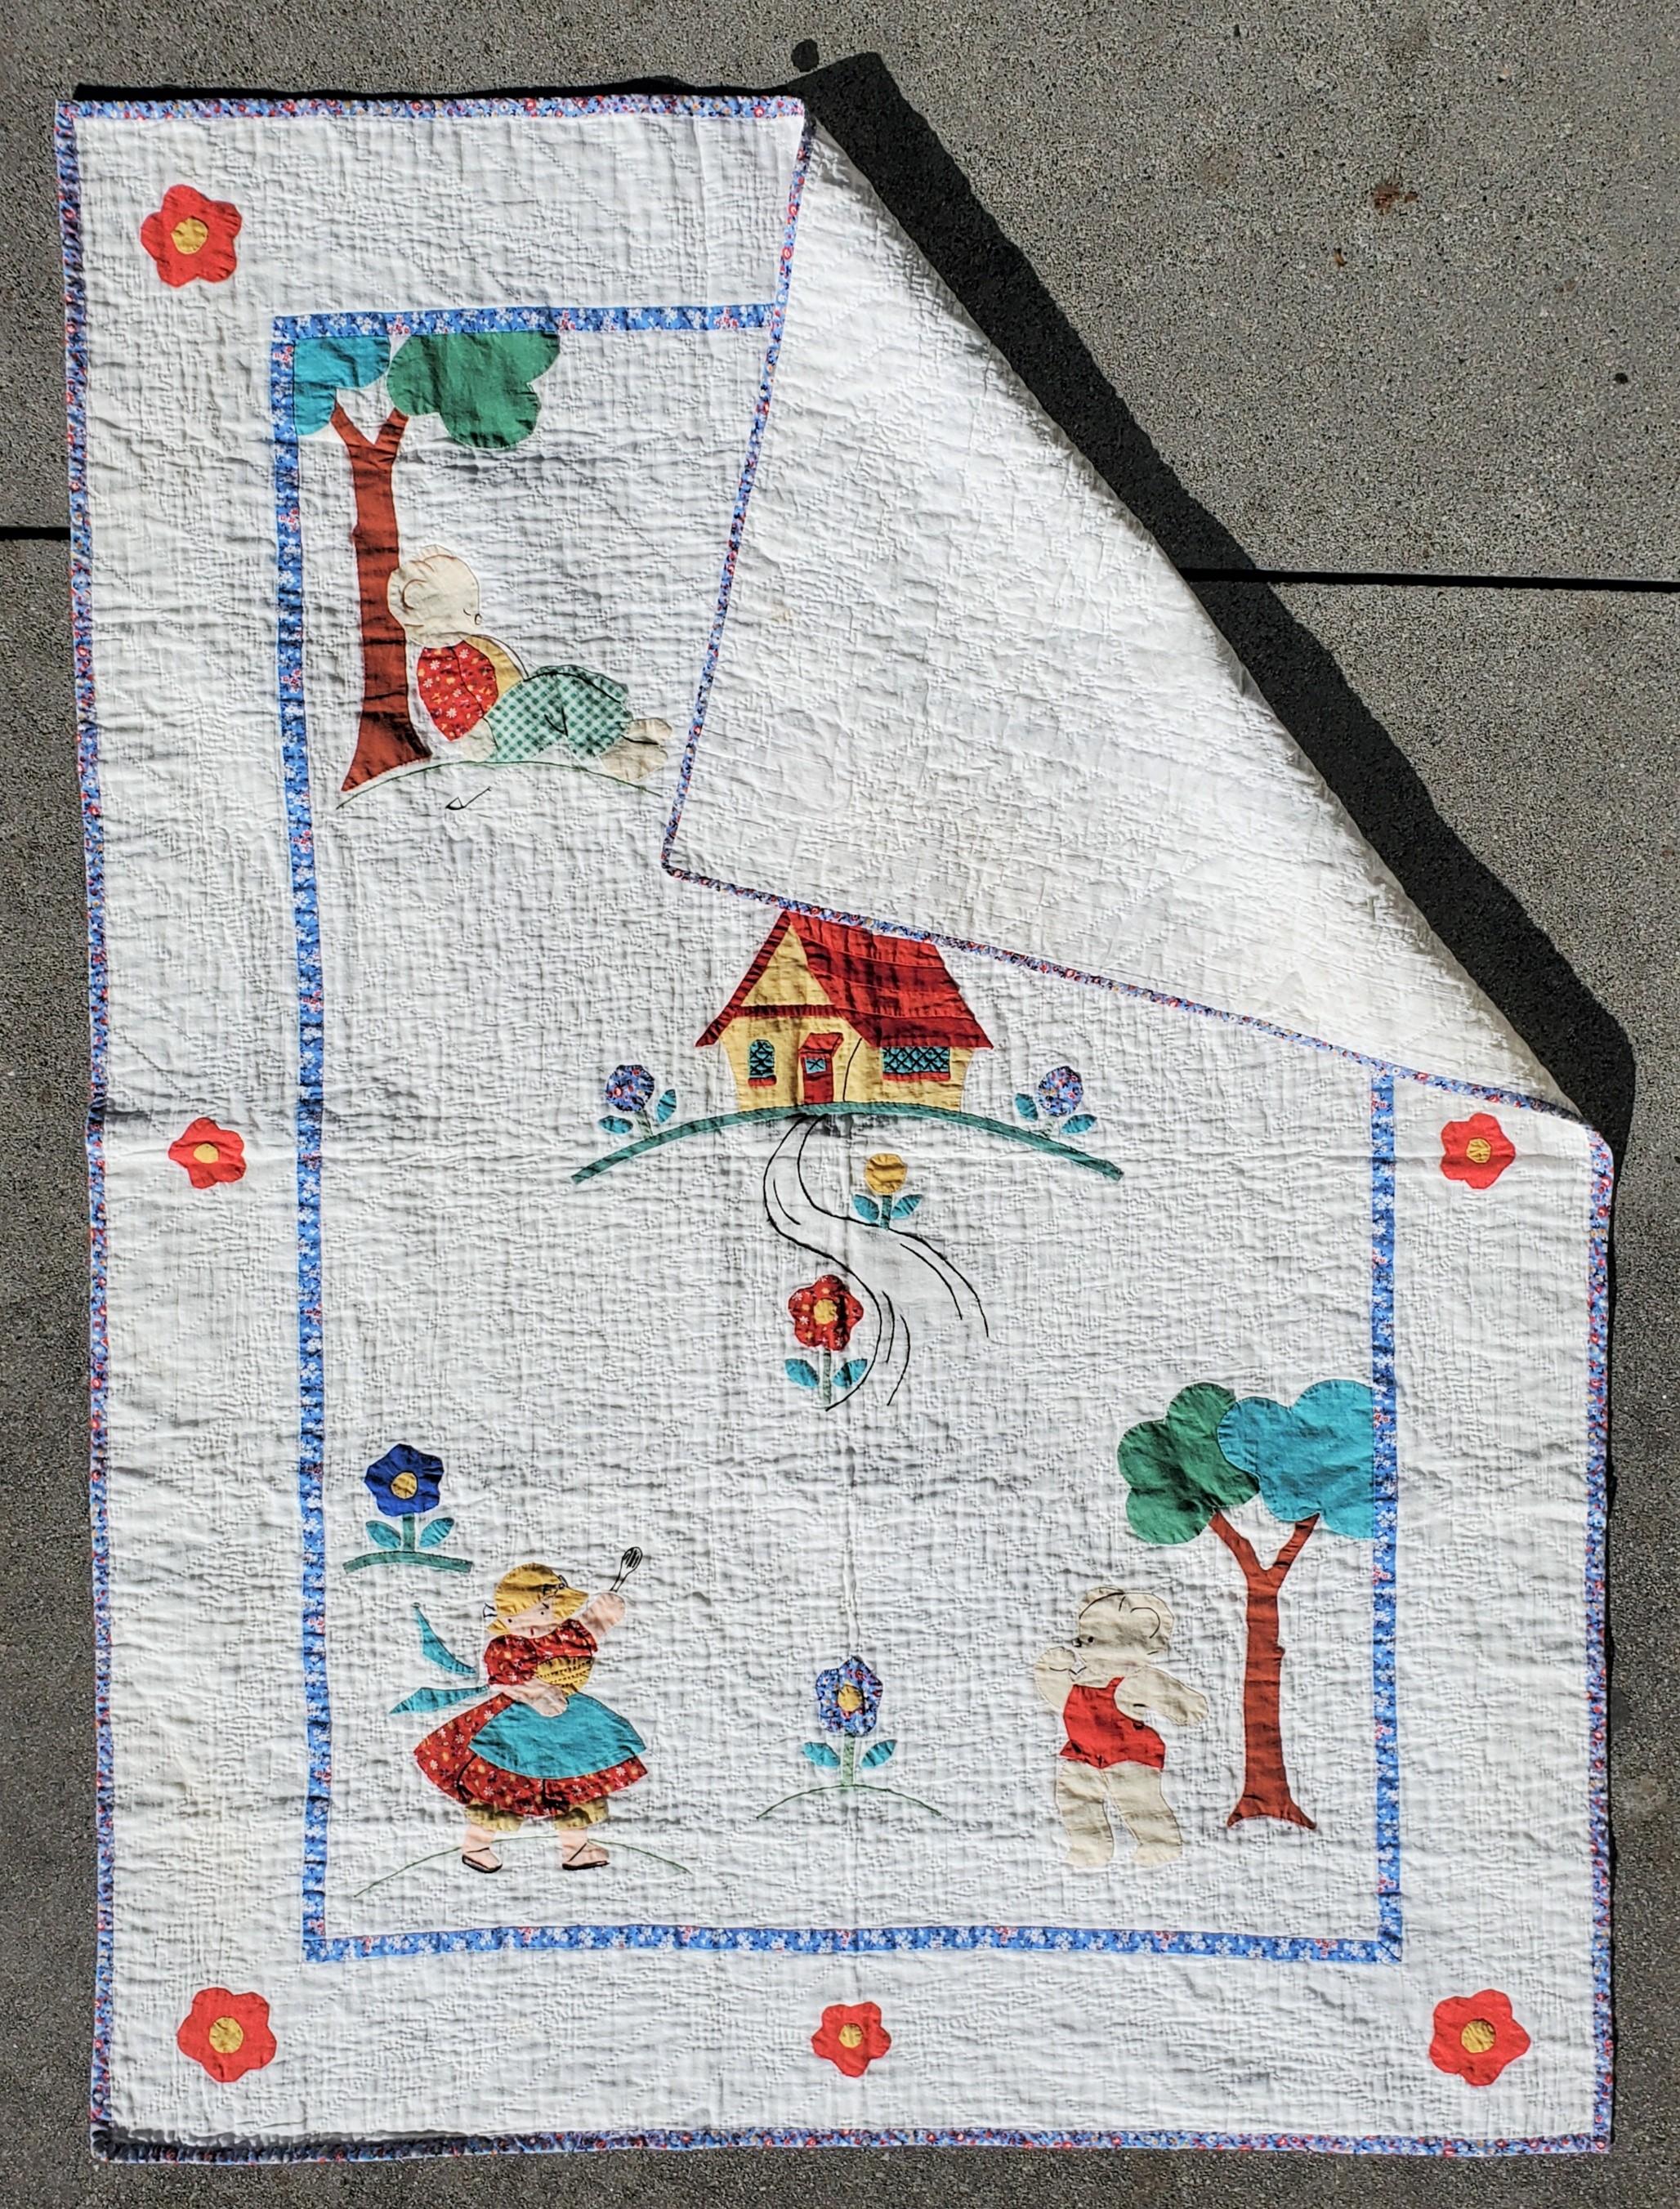 This fun pictorial crib quilt is from the forties and in good condition.